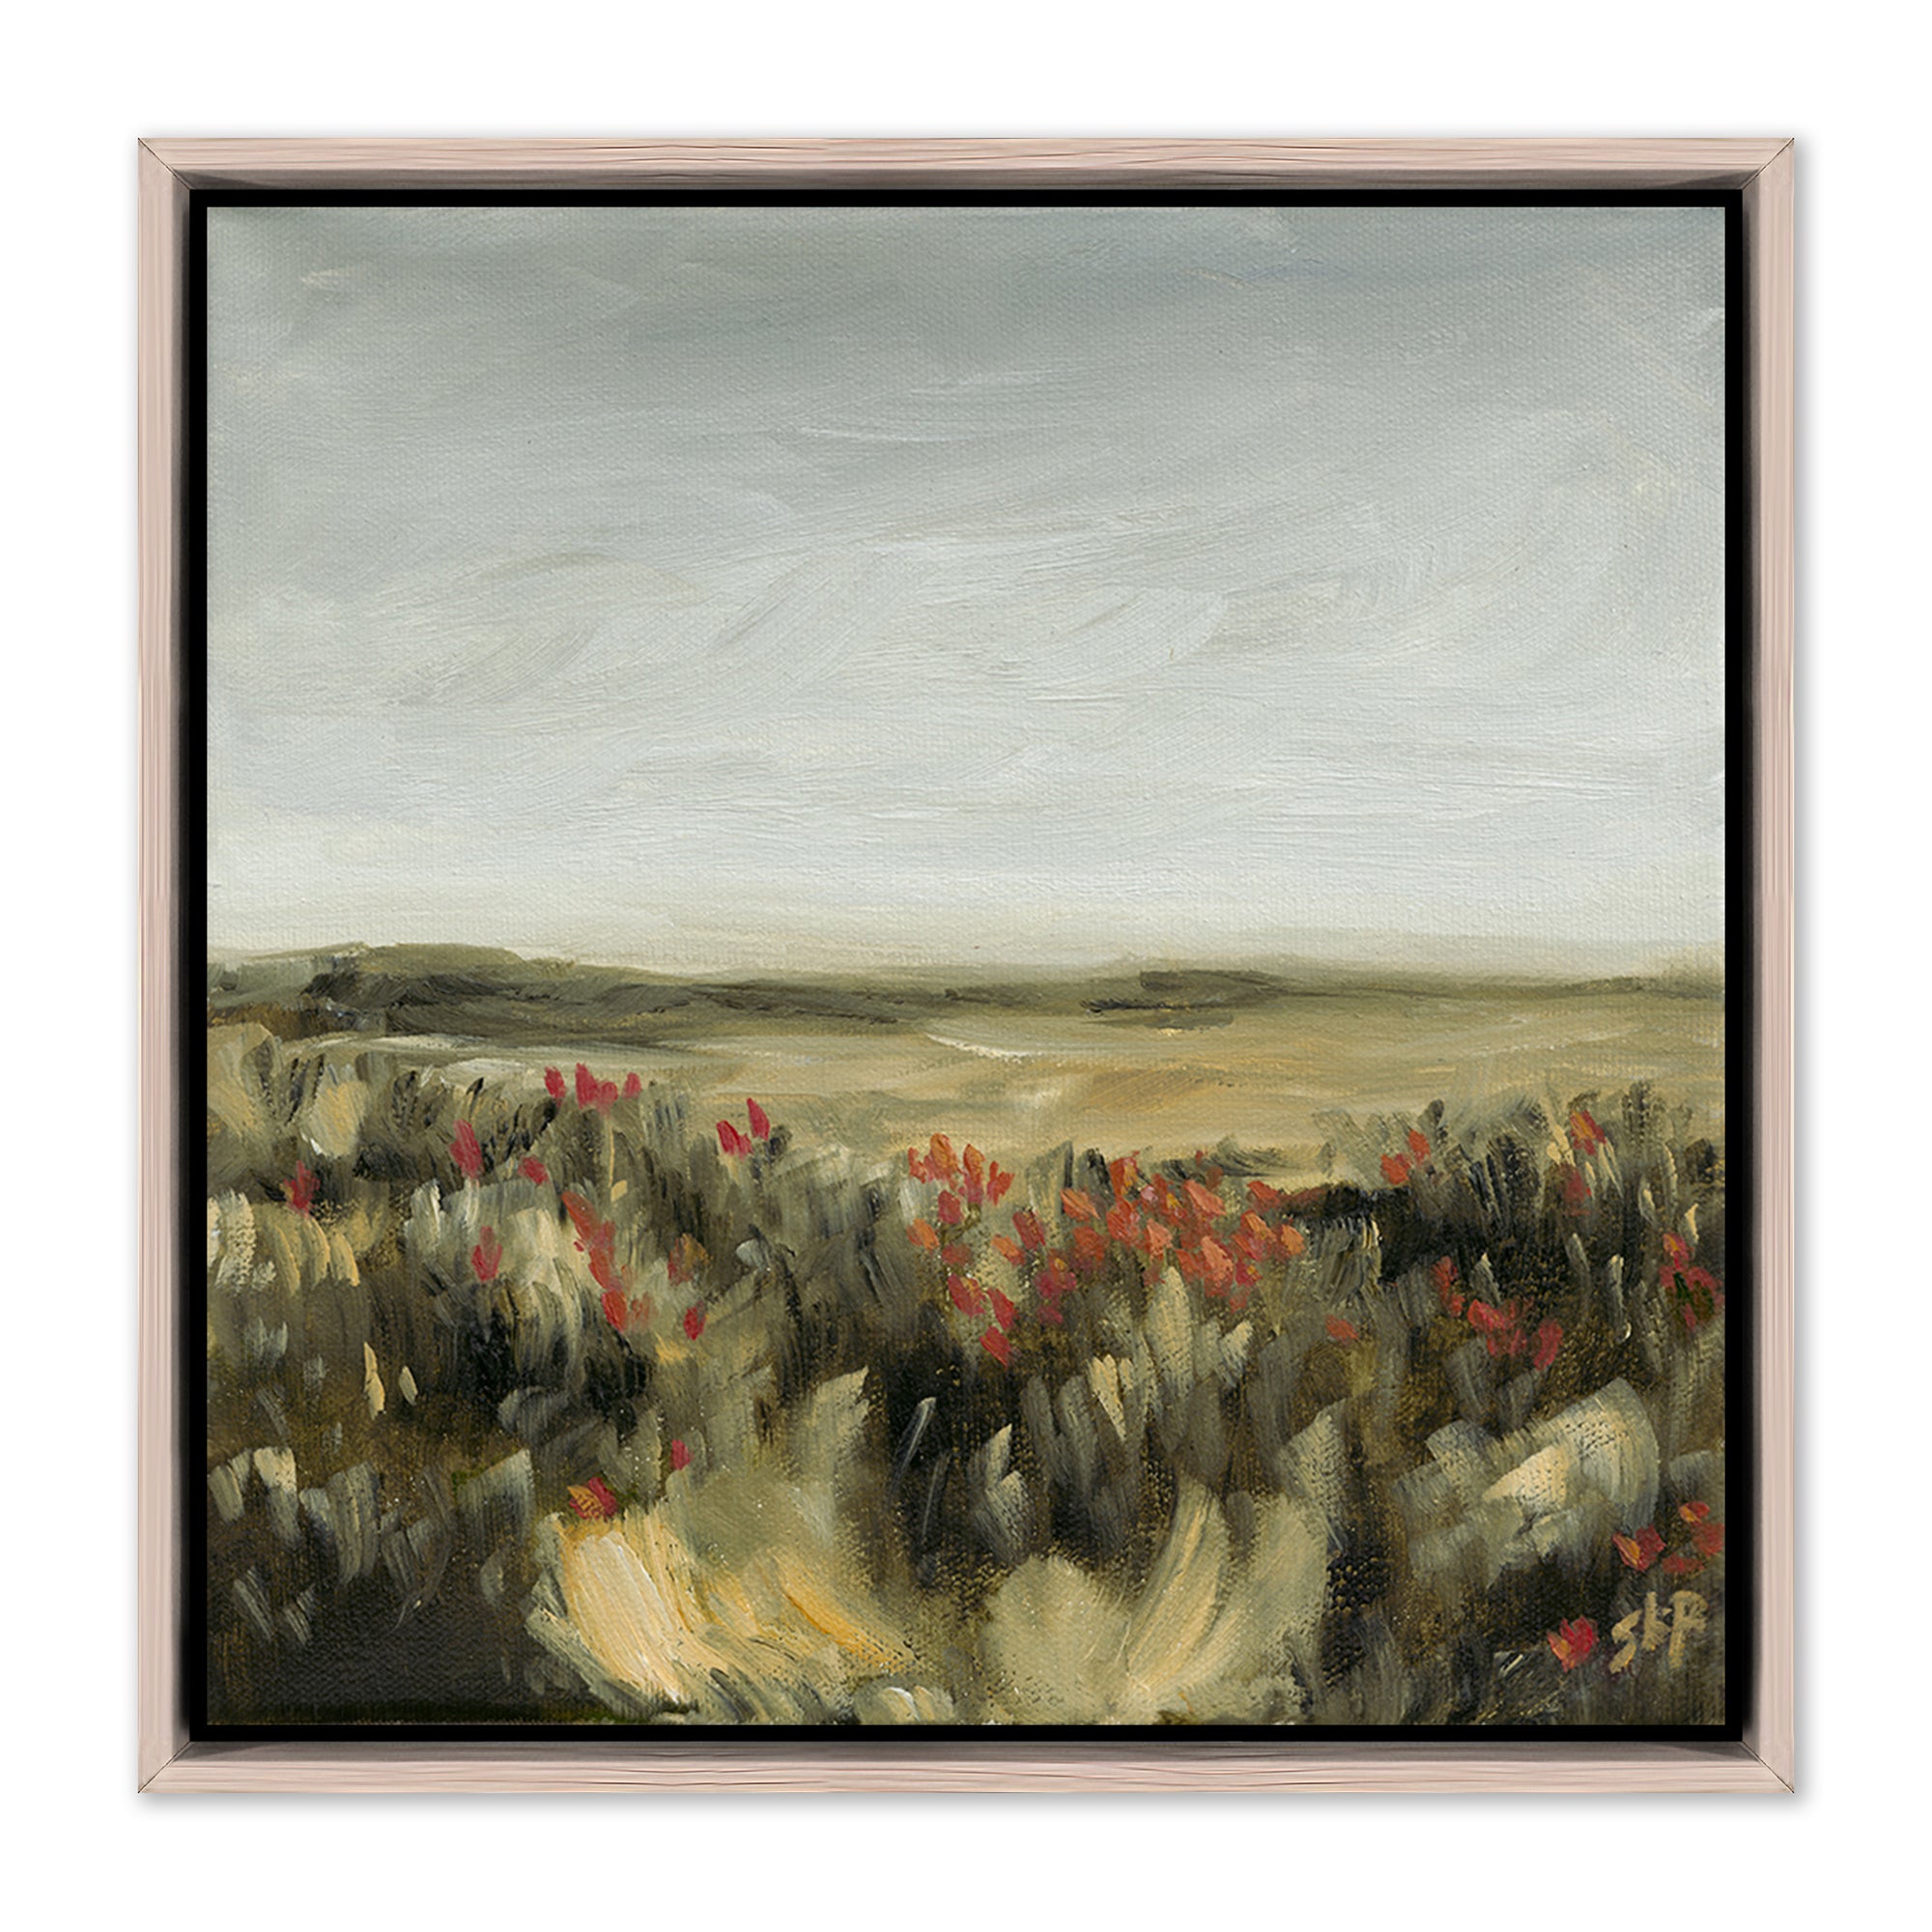 Framed wall art called Flower Field by Shaina Page